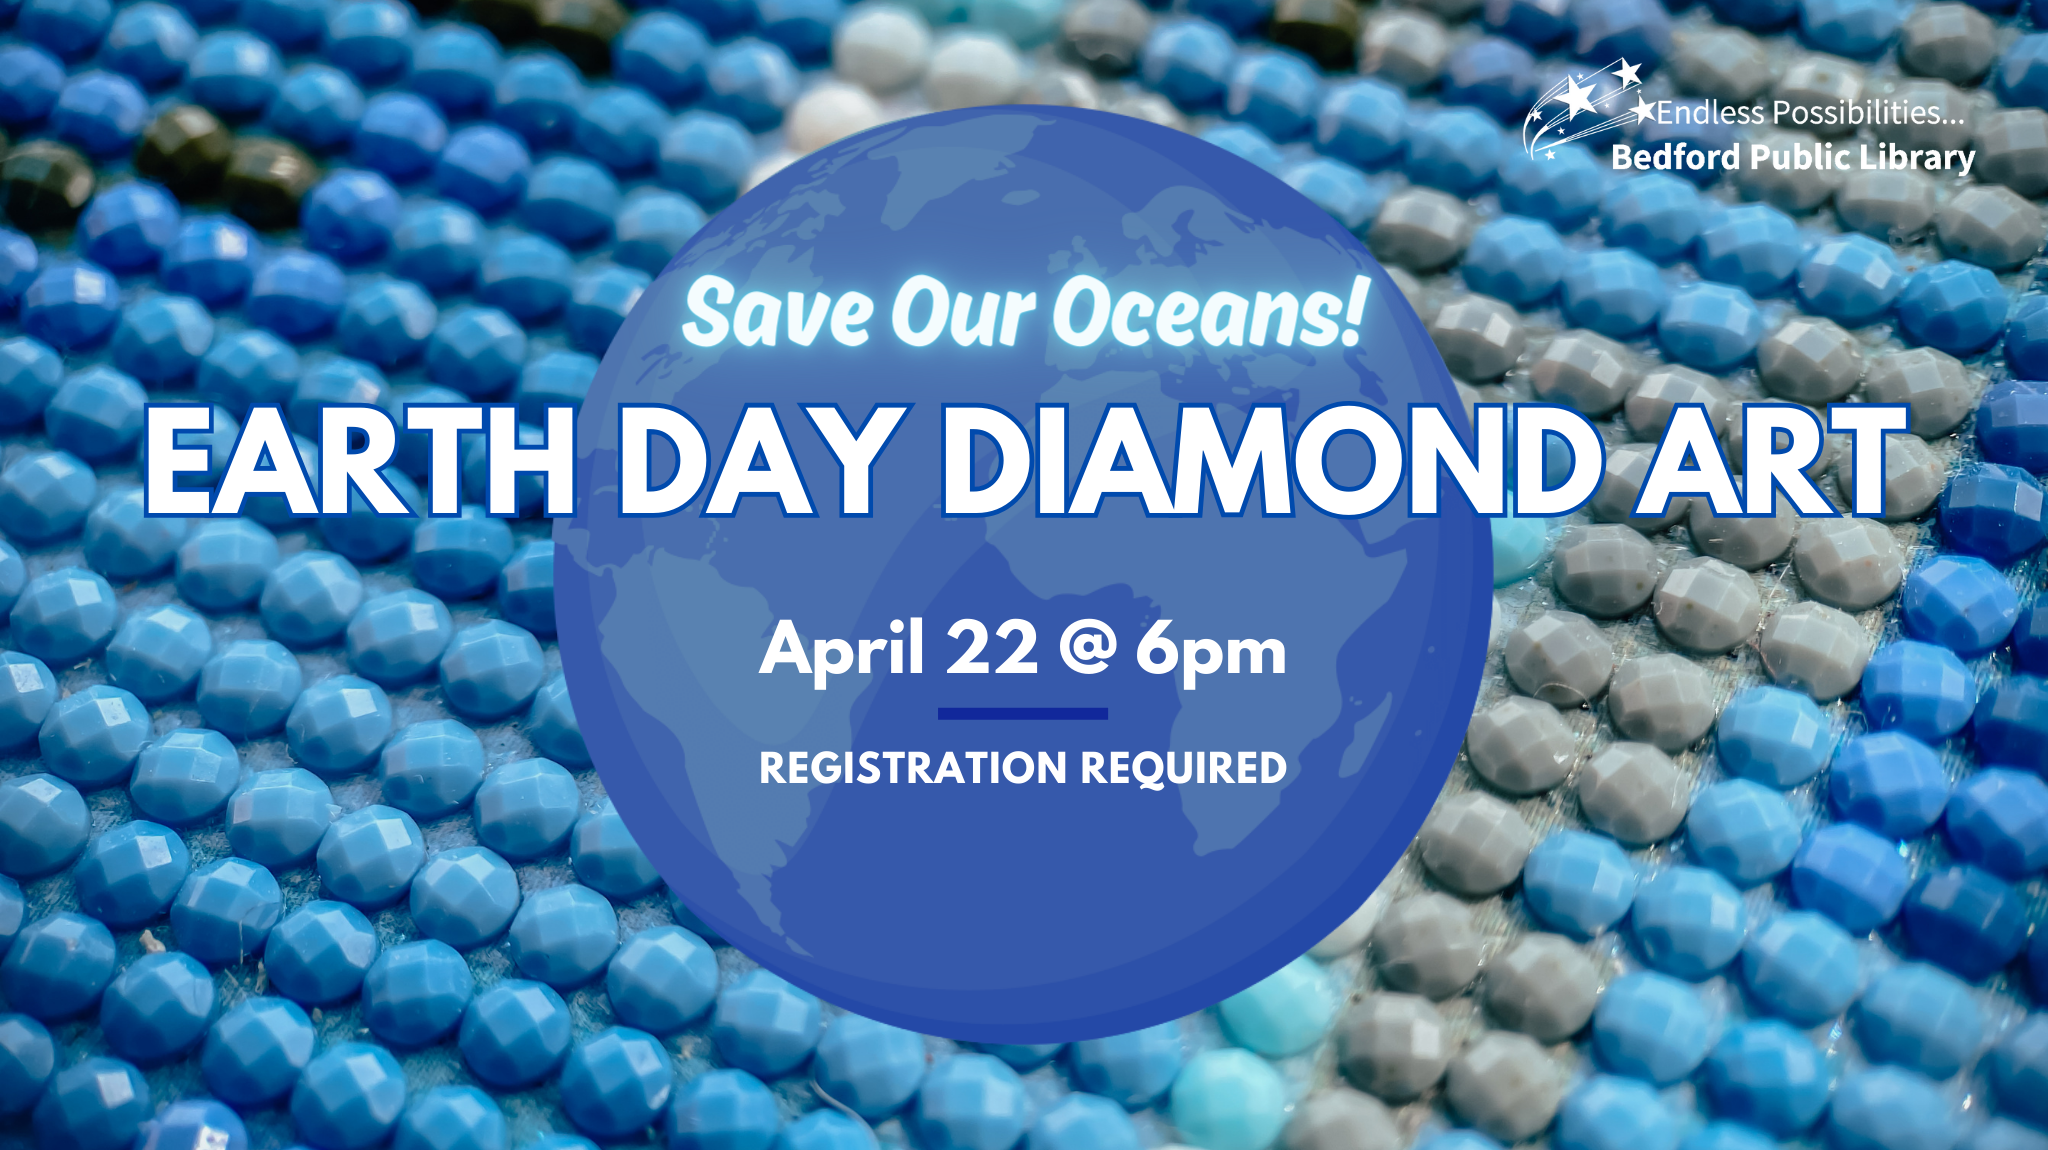 Earth Day Diamond Art on April 22 at 6pm